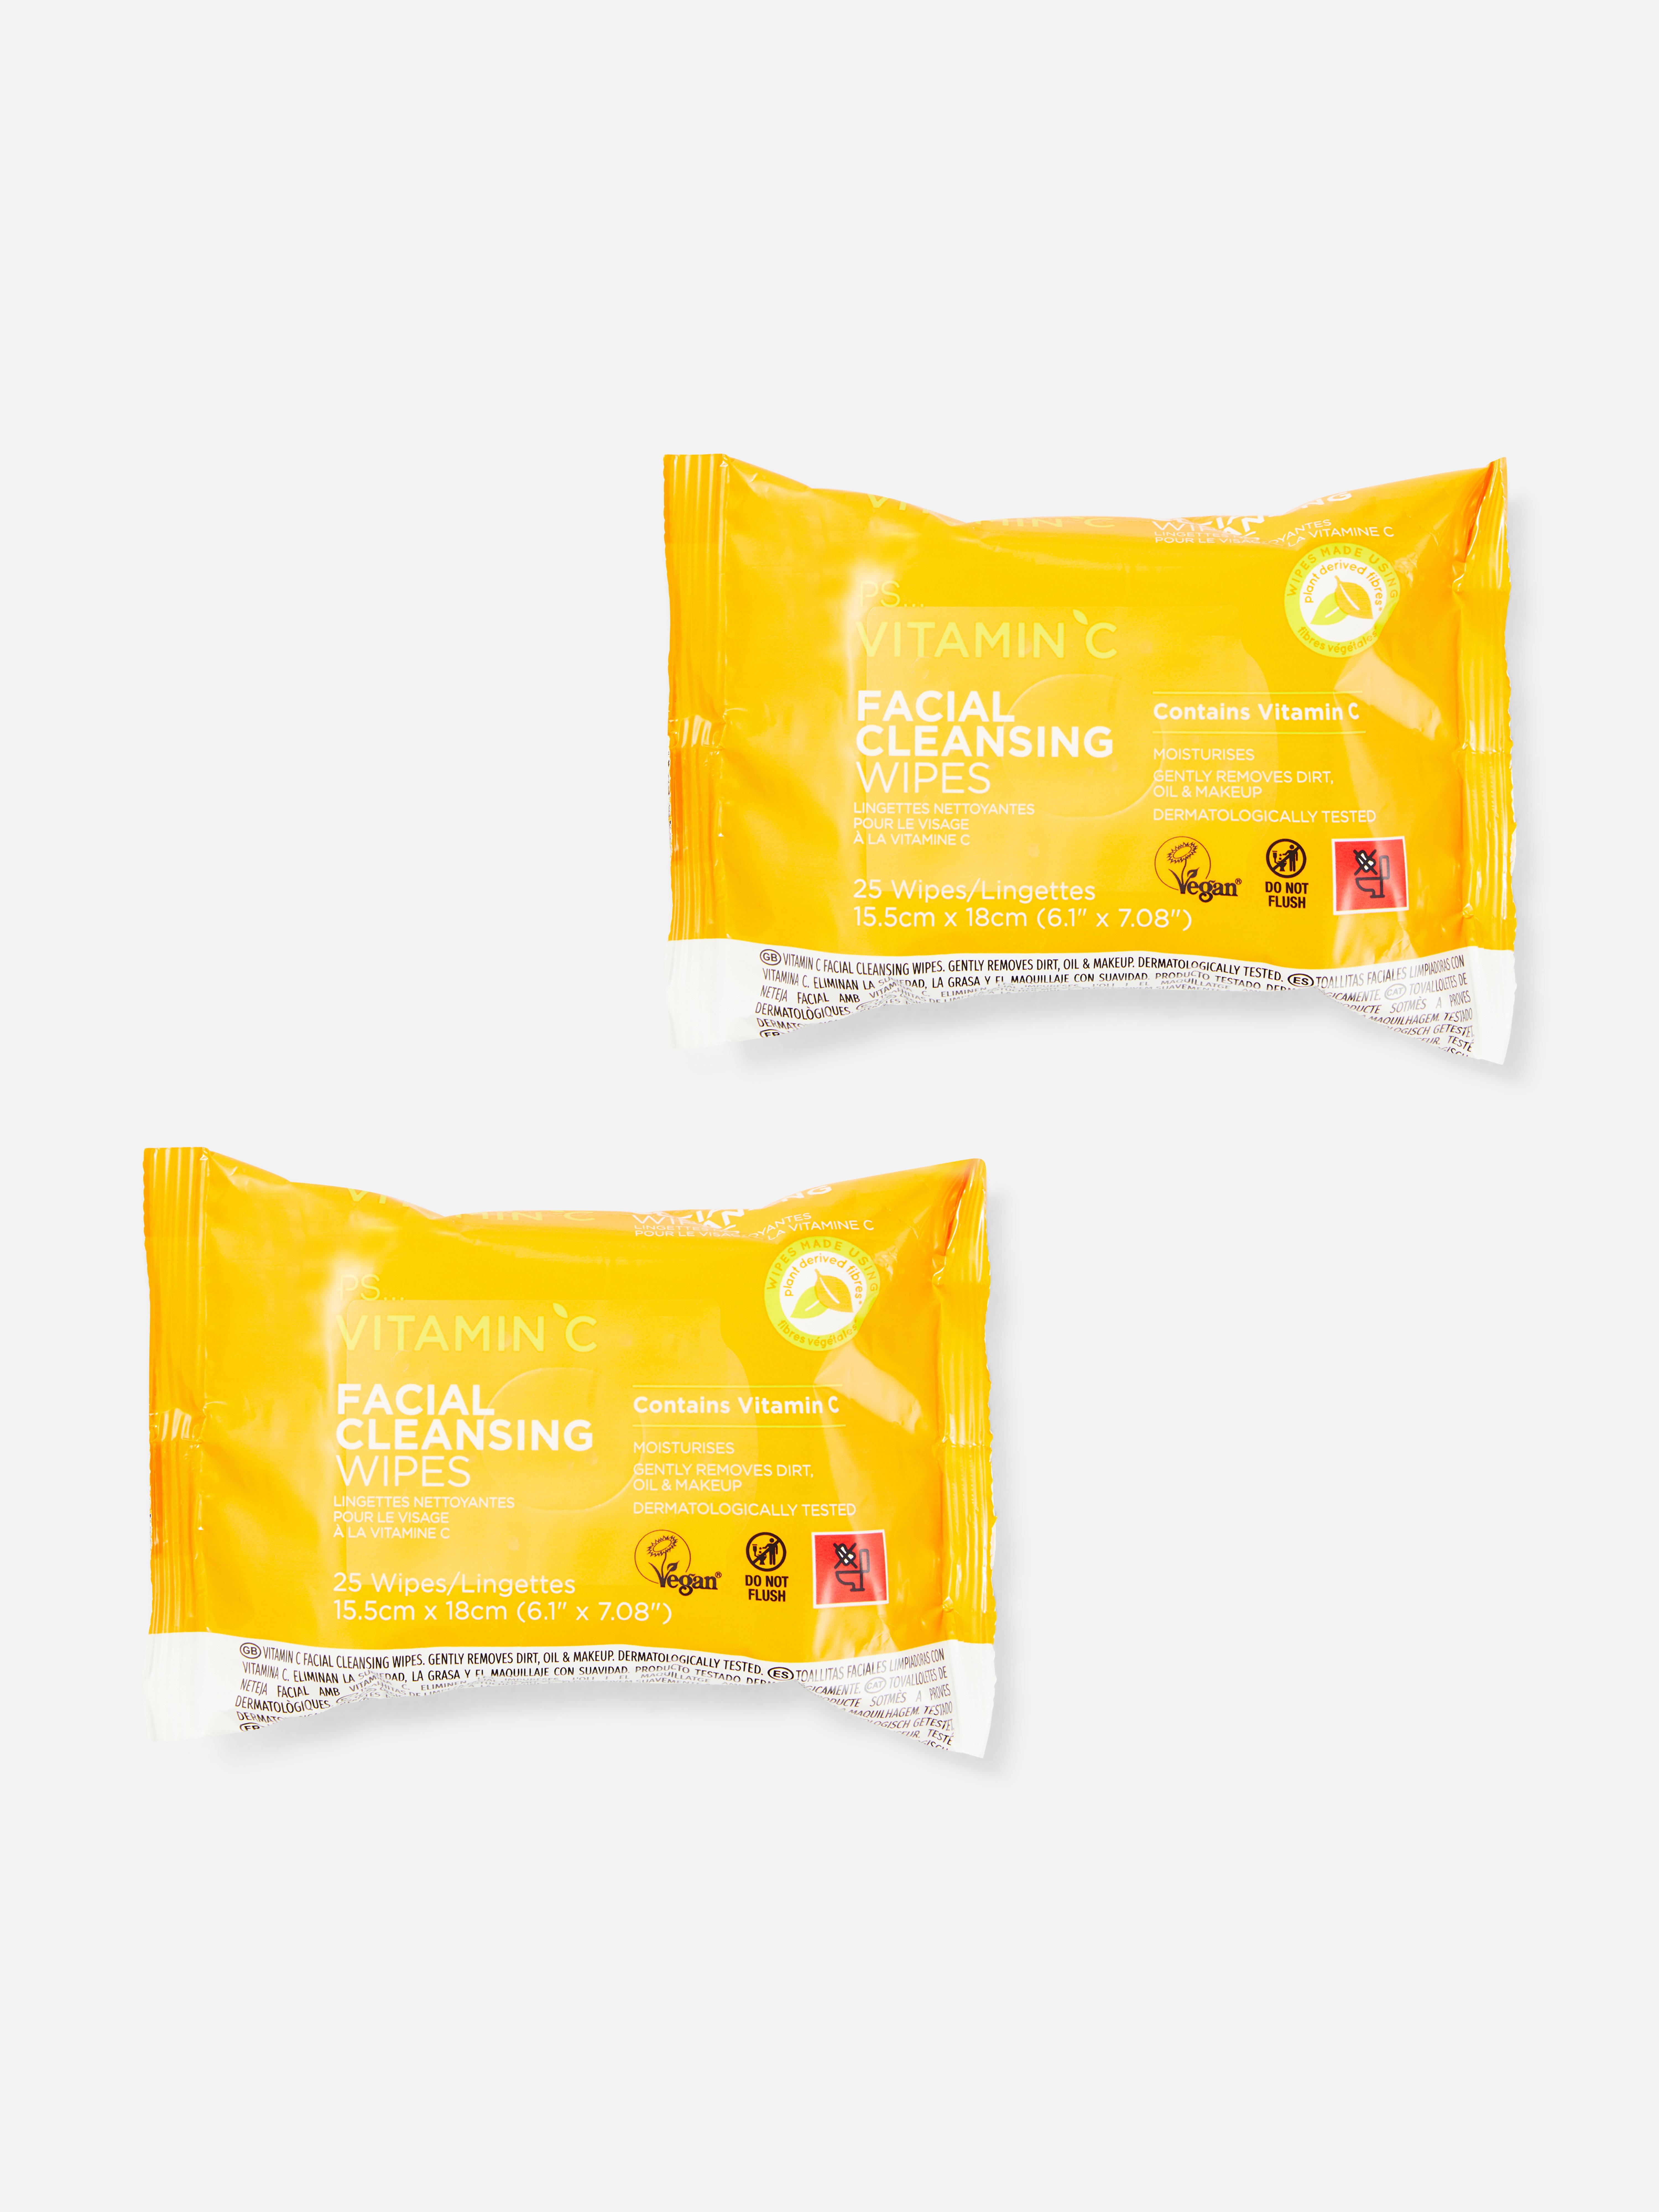 PS... Vitamin C Facial Cleansing Wipes